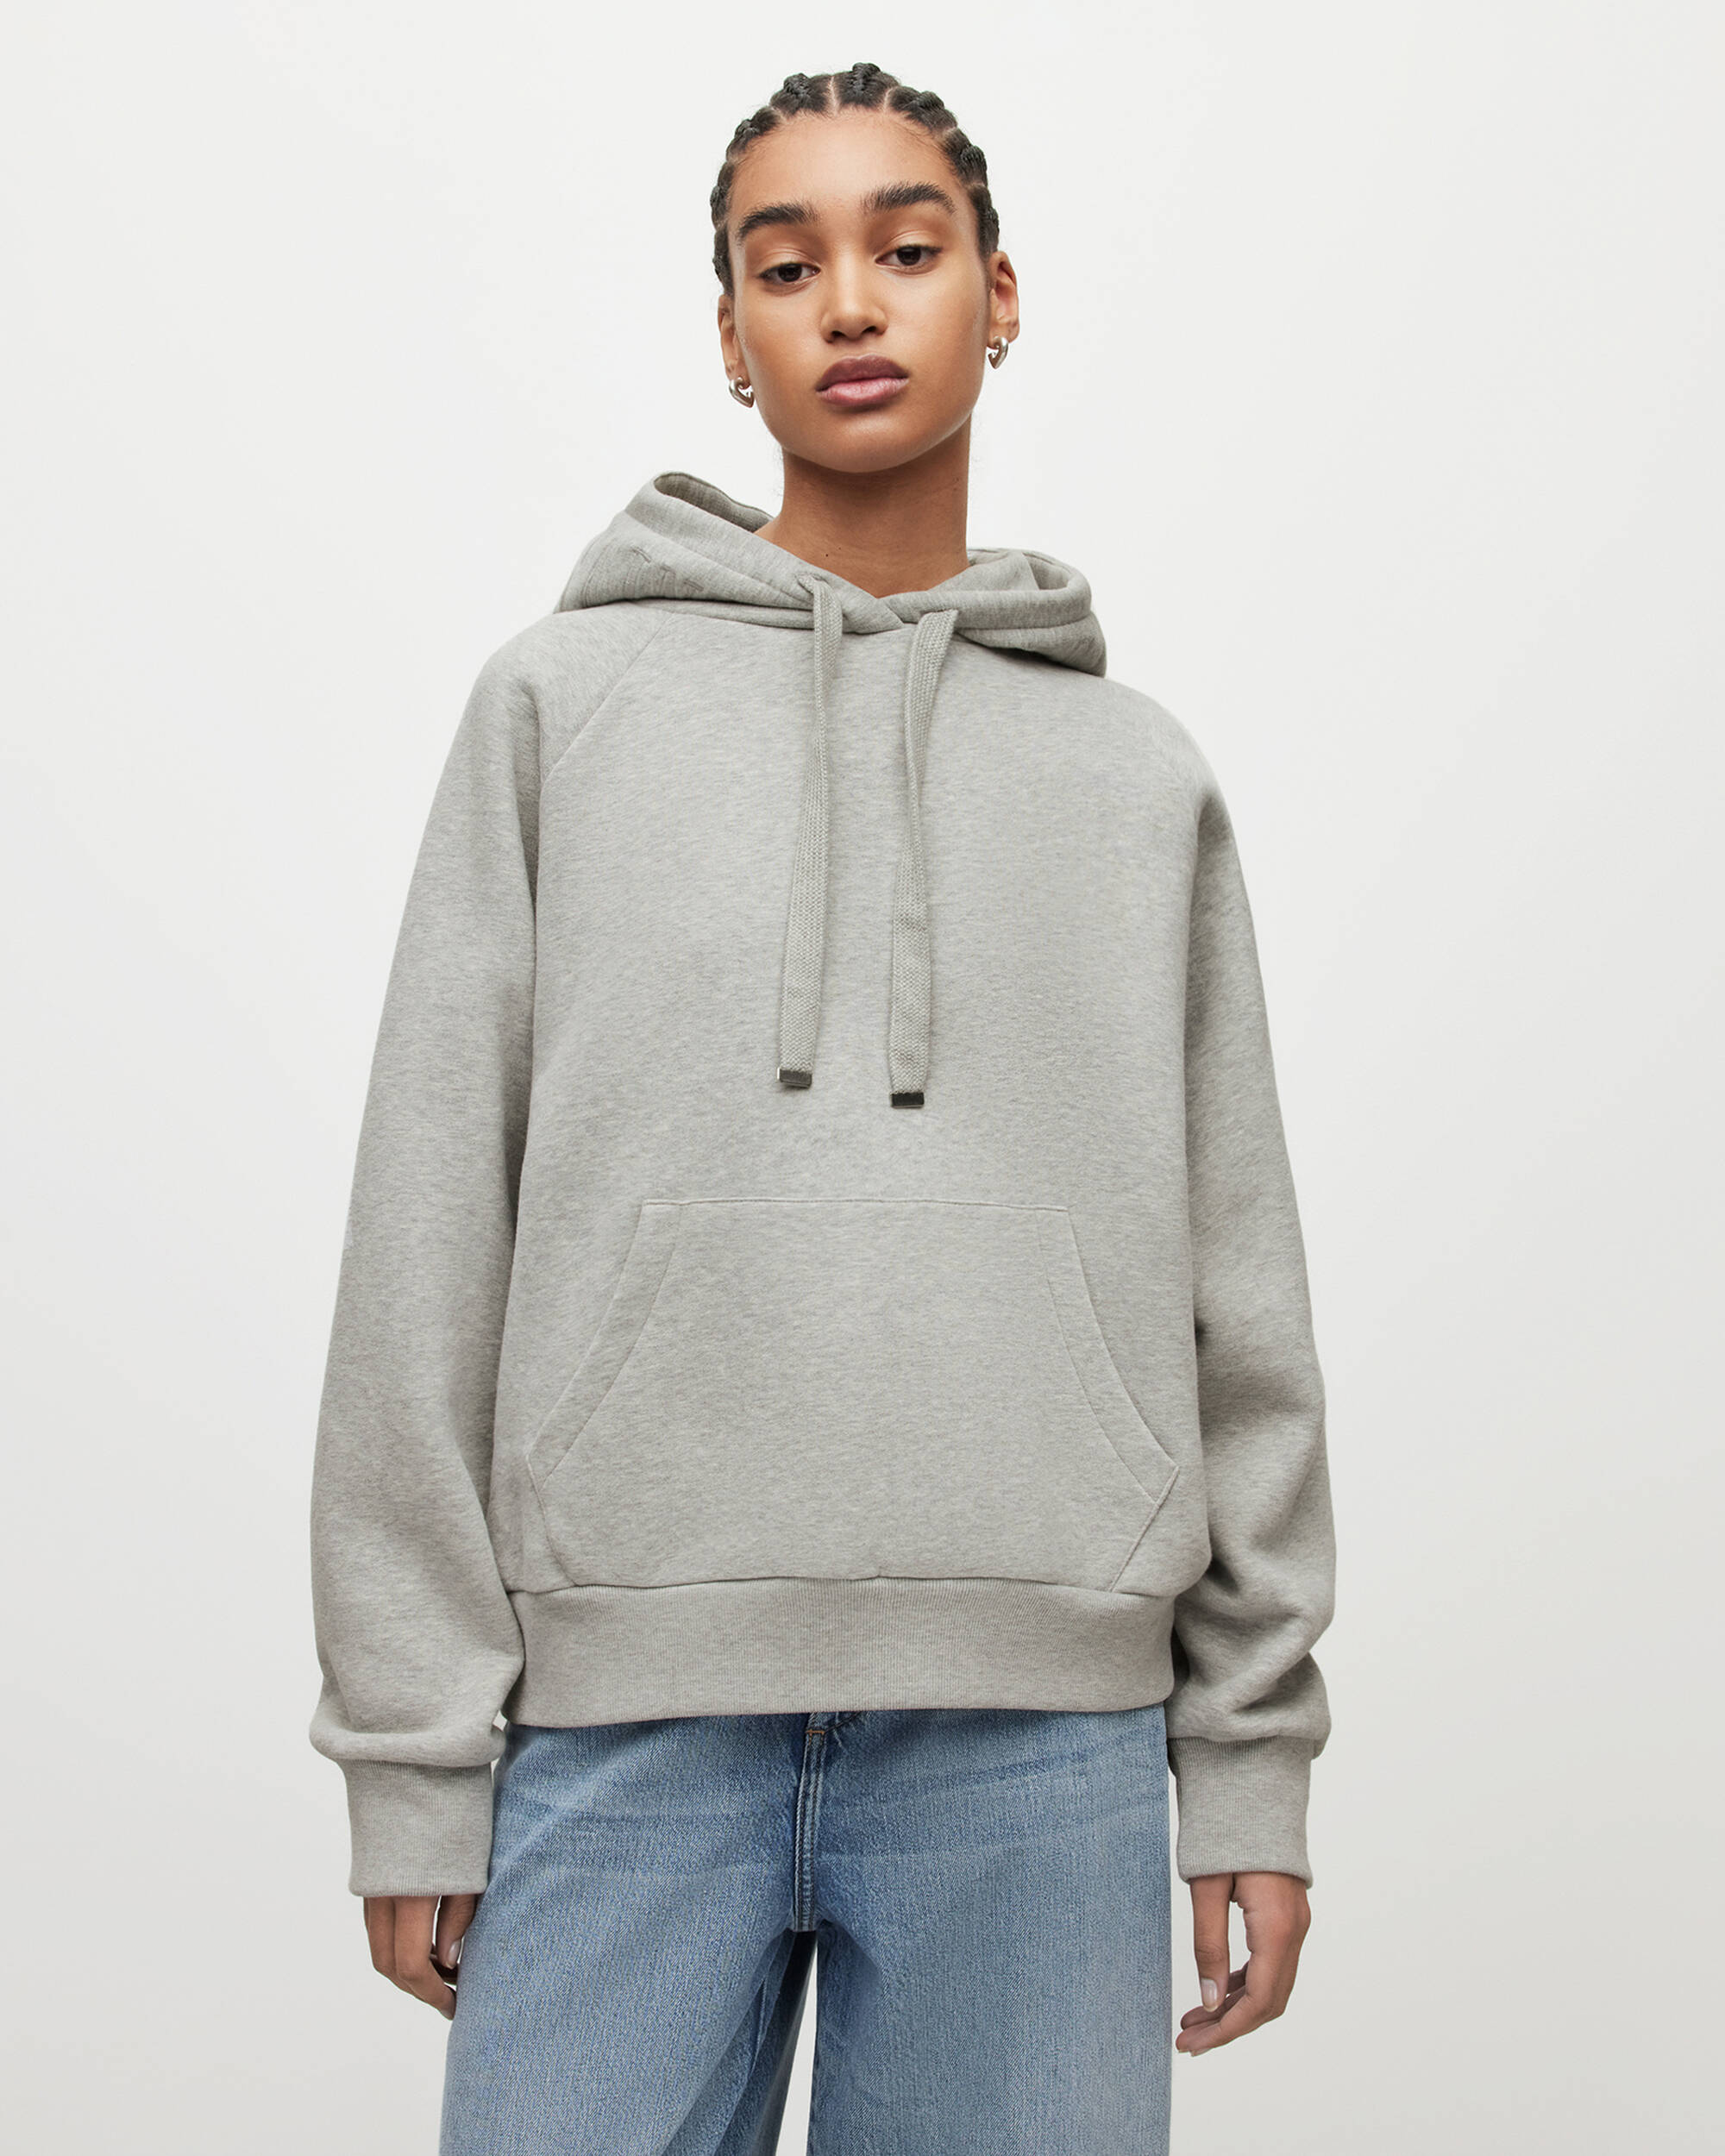 Talon Pullover Embroidered Hoodie Grey Marl | ALLSAINTS US